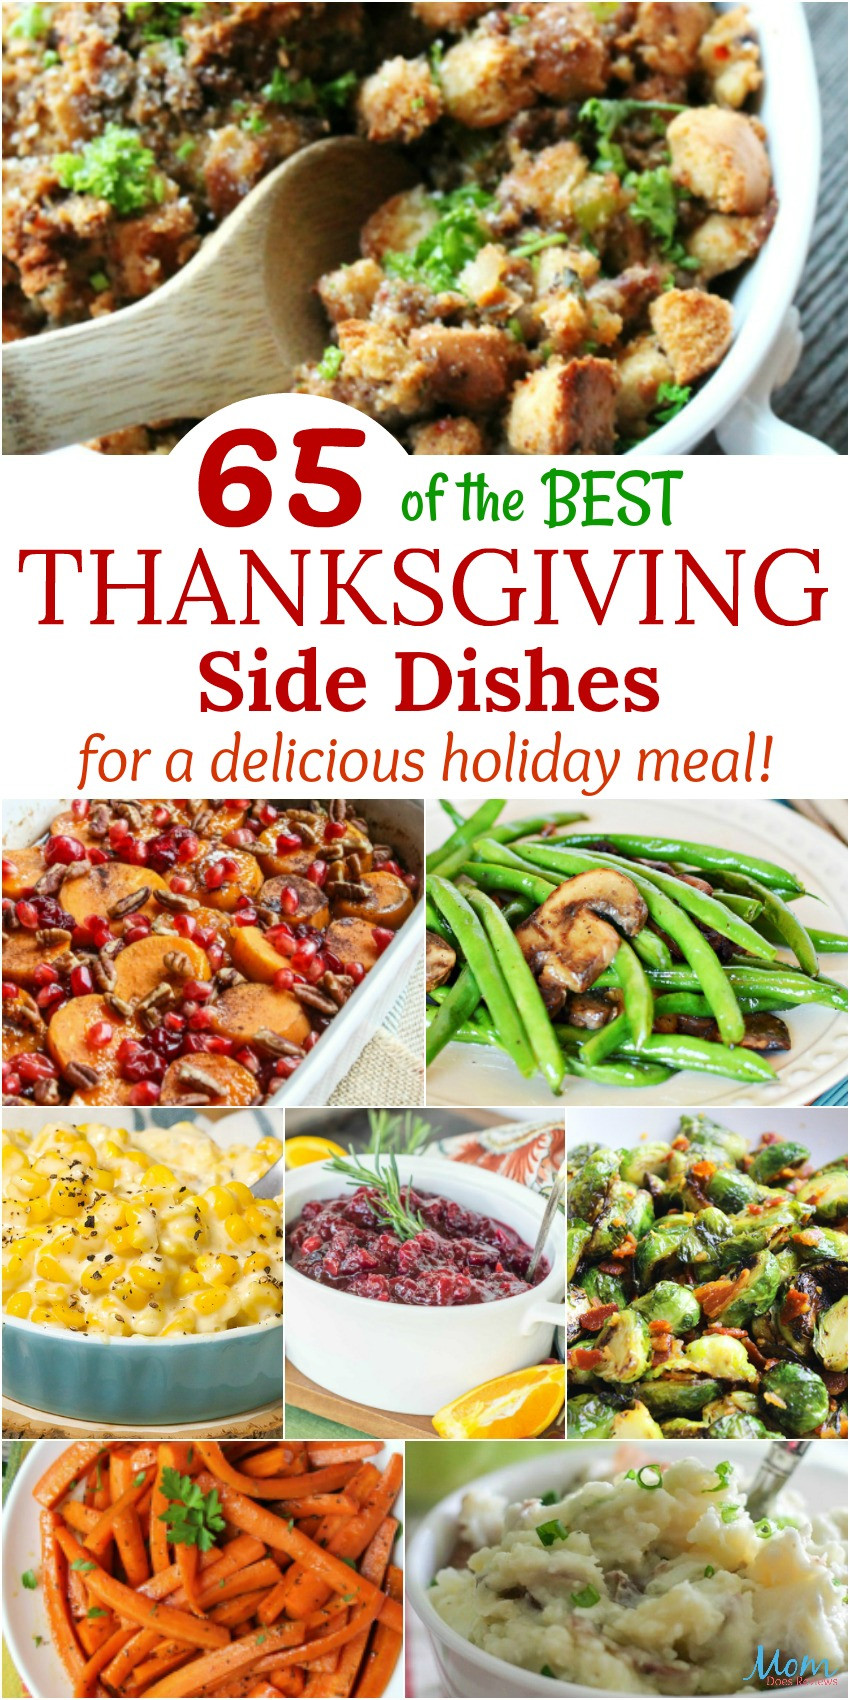 Best Thanksgiving Side Dishes
 65 Best Thanksgiving Side Dishes for a Delicious Holiday